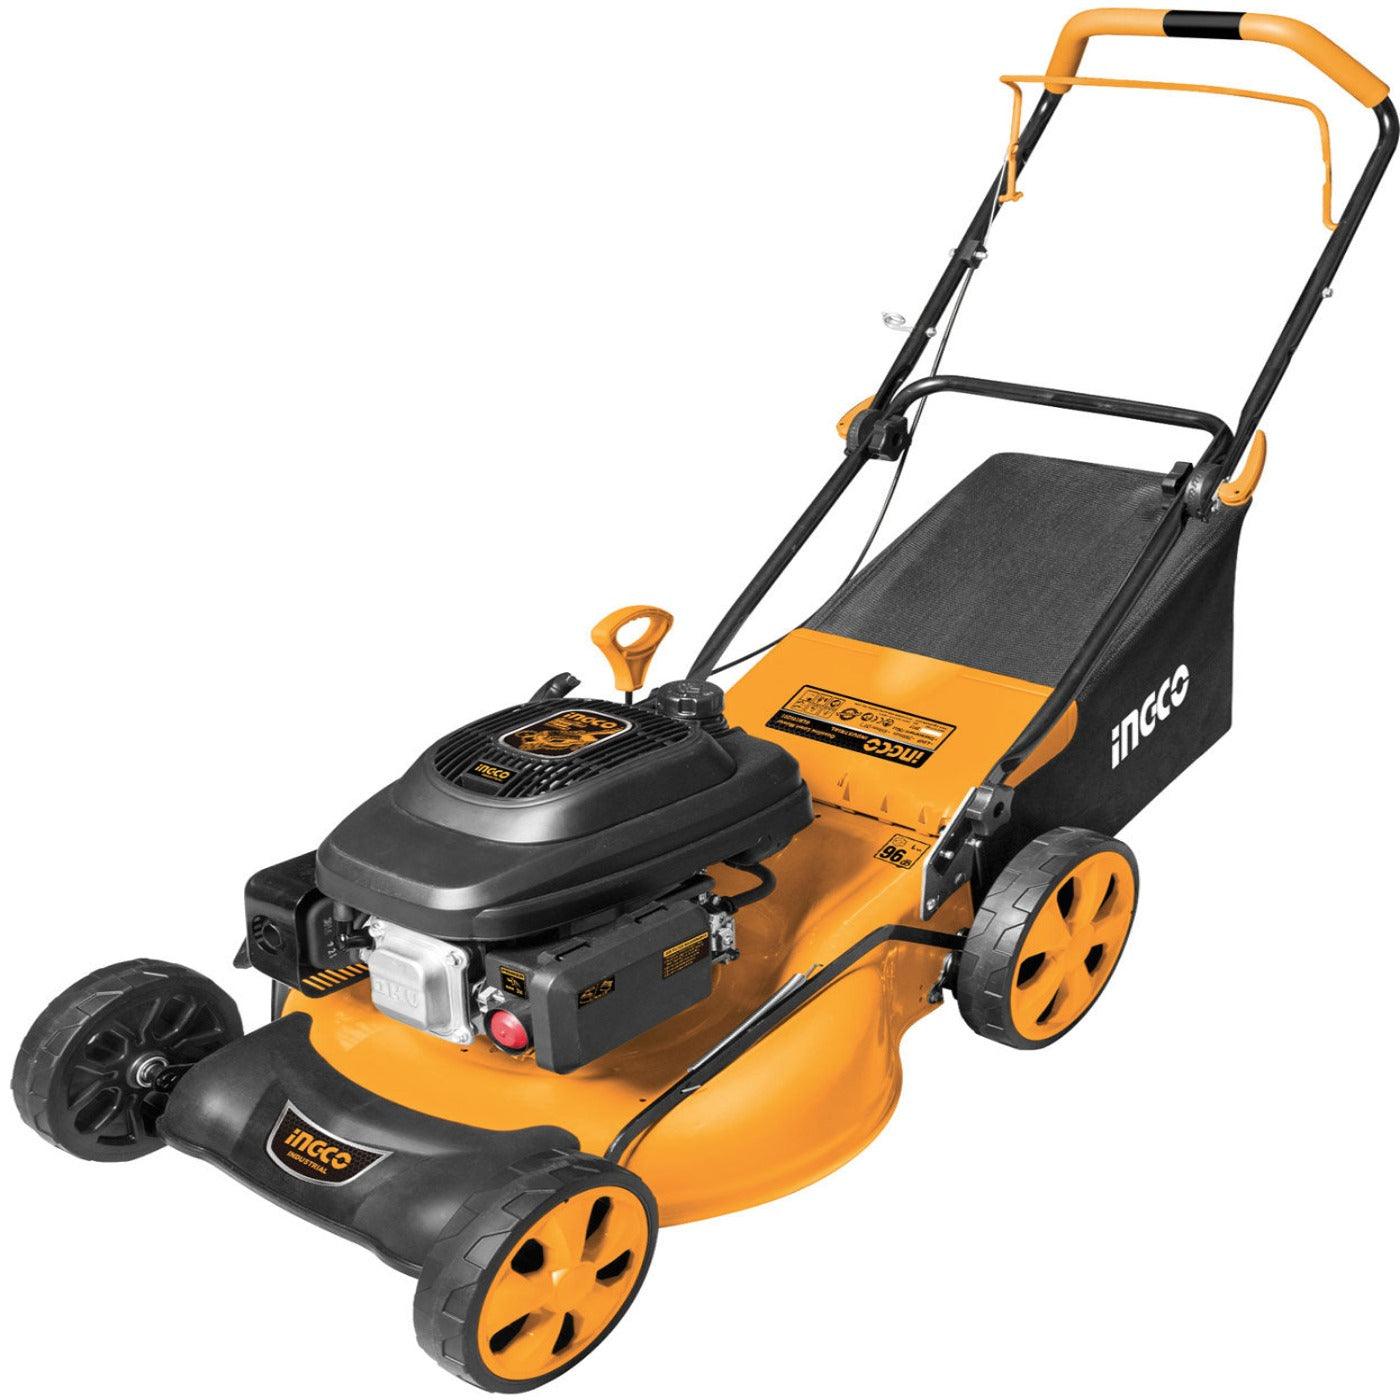 Ingco Gasoline Lawn Mower 4.8Hp (3.5Kw) - GLM196201 | Supply Master | Accra, Ghana Lawn Mower Buy Tools hardware Building materials